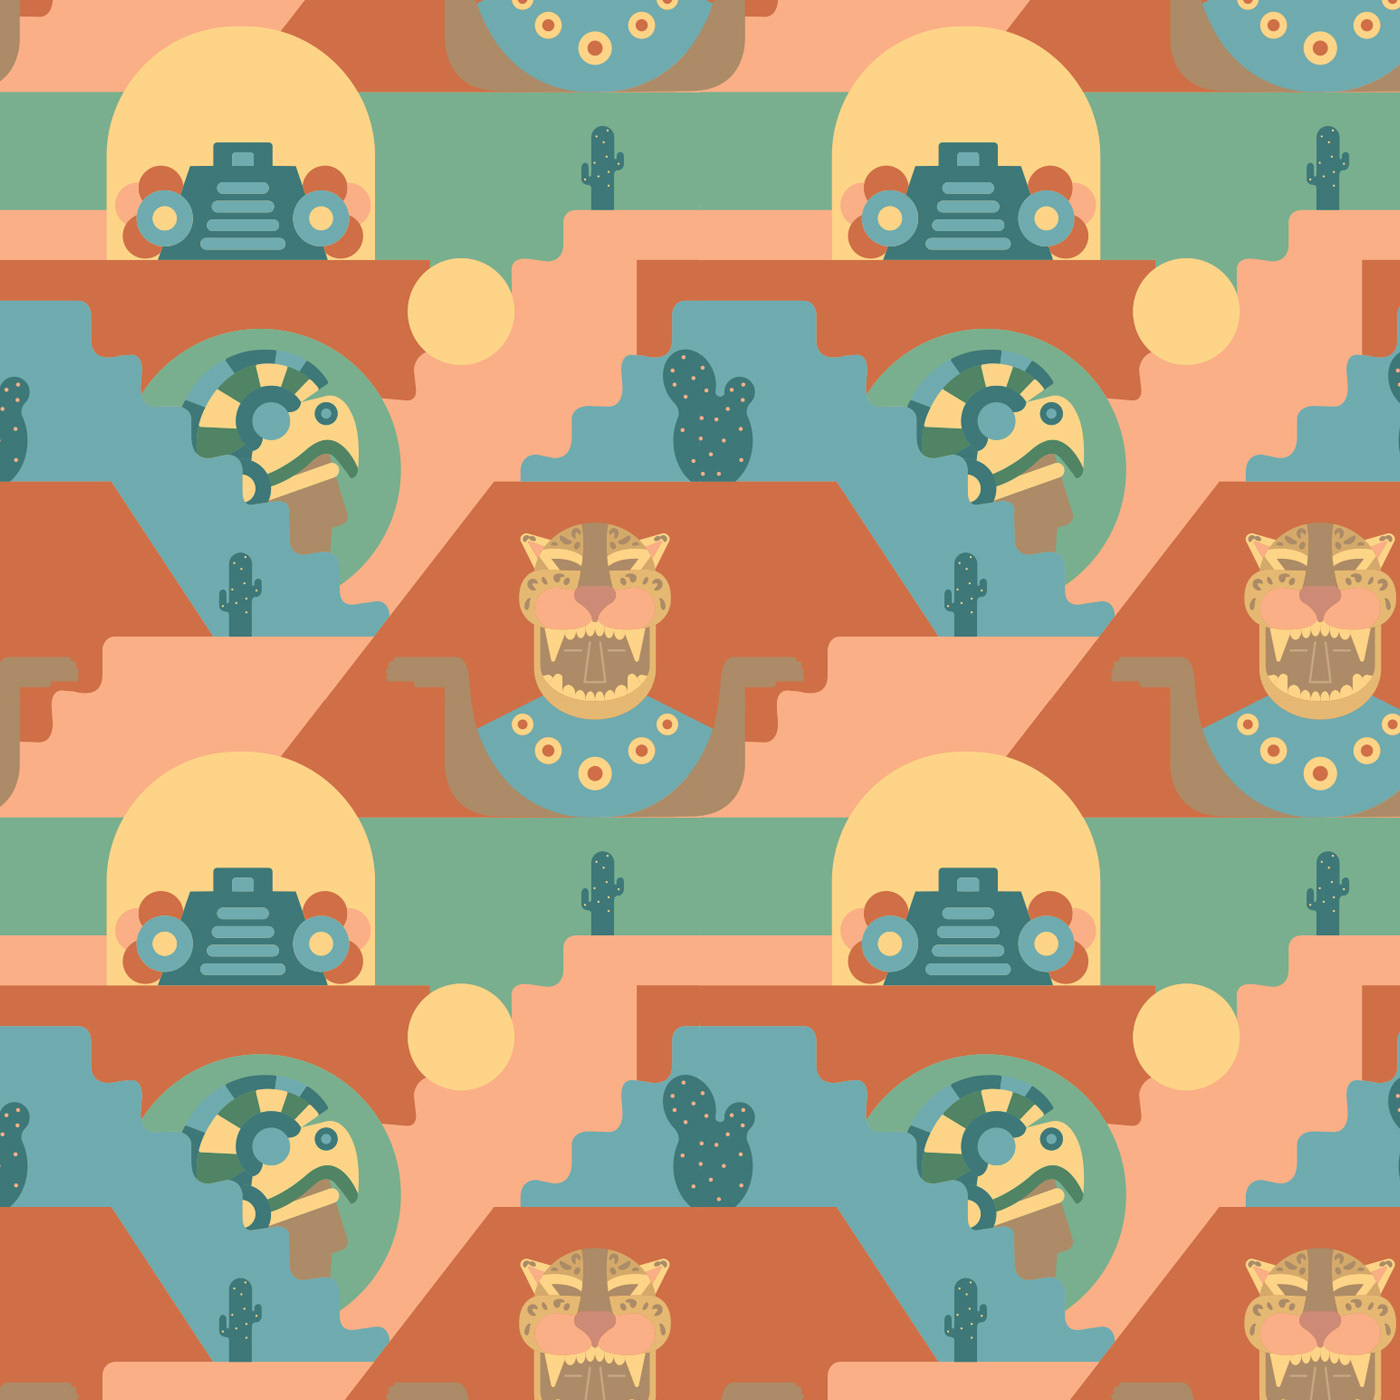 Animation for the "Next stop patterns project" collaboration of 27 illustrators from 15 countries